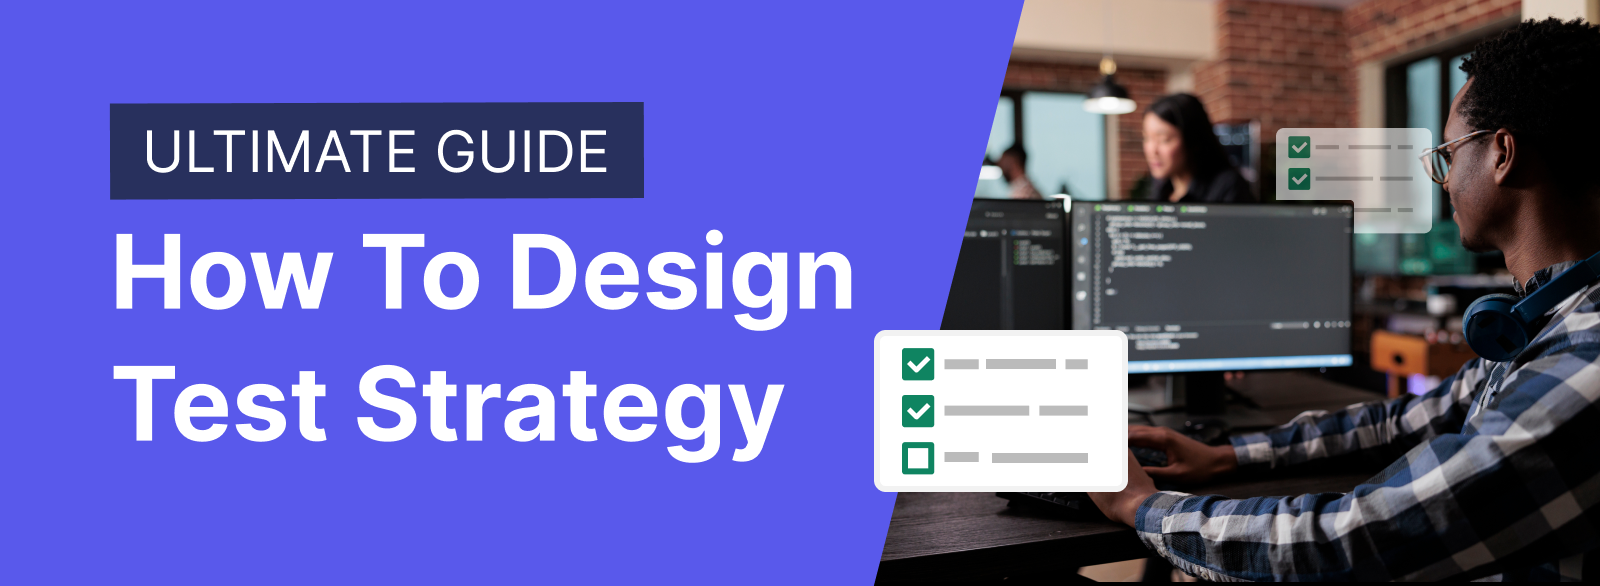 How To Design Test Strategy: Ultimate Guide